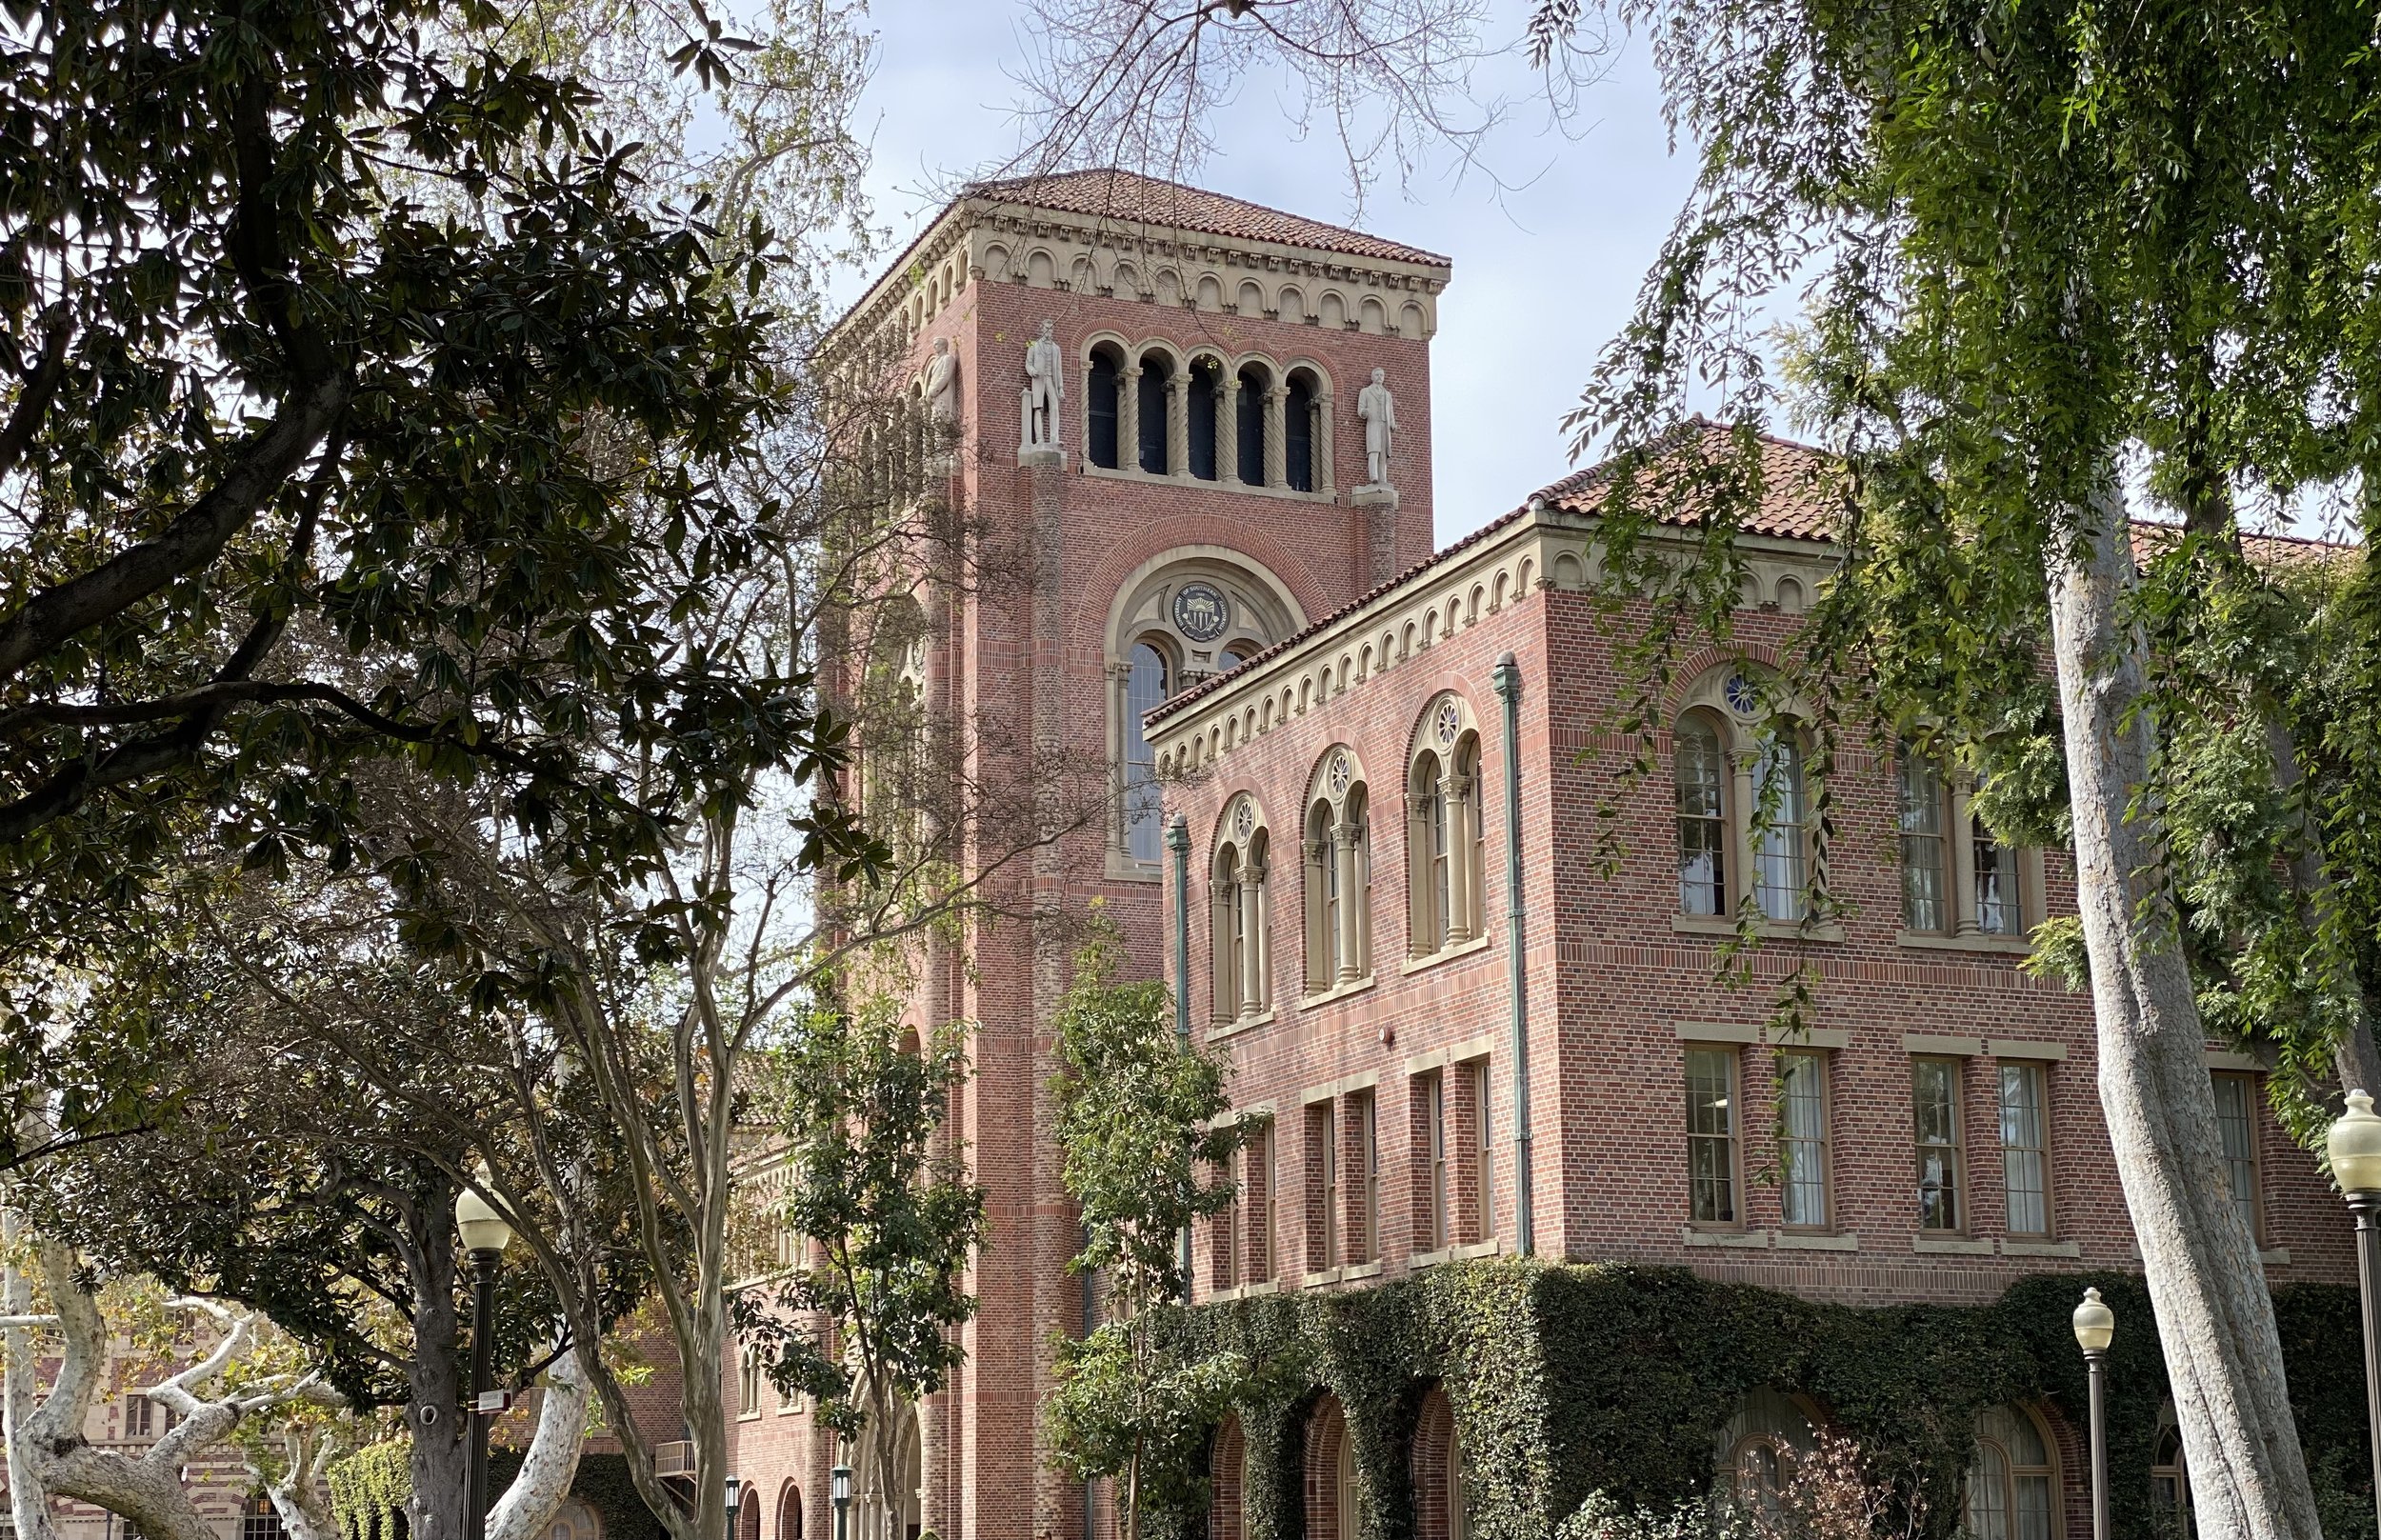 1. The Figueroa Corridor: Bovard Auditorium on the campus of the University of Southern California